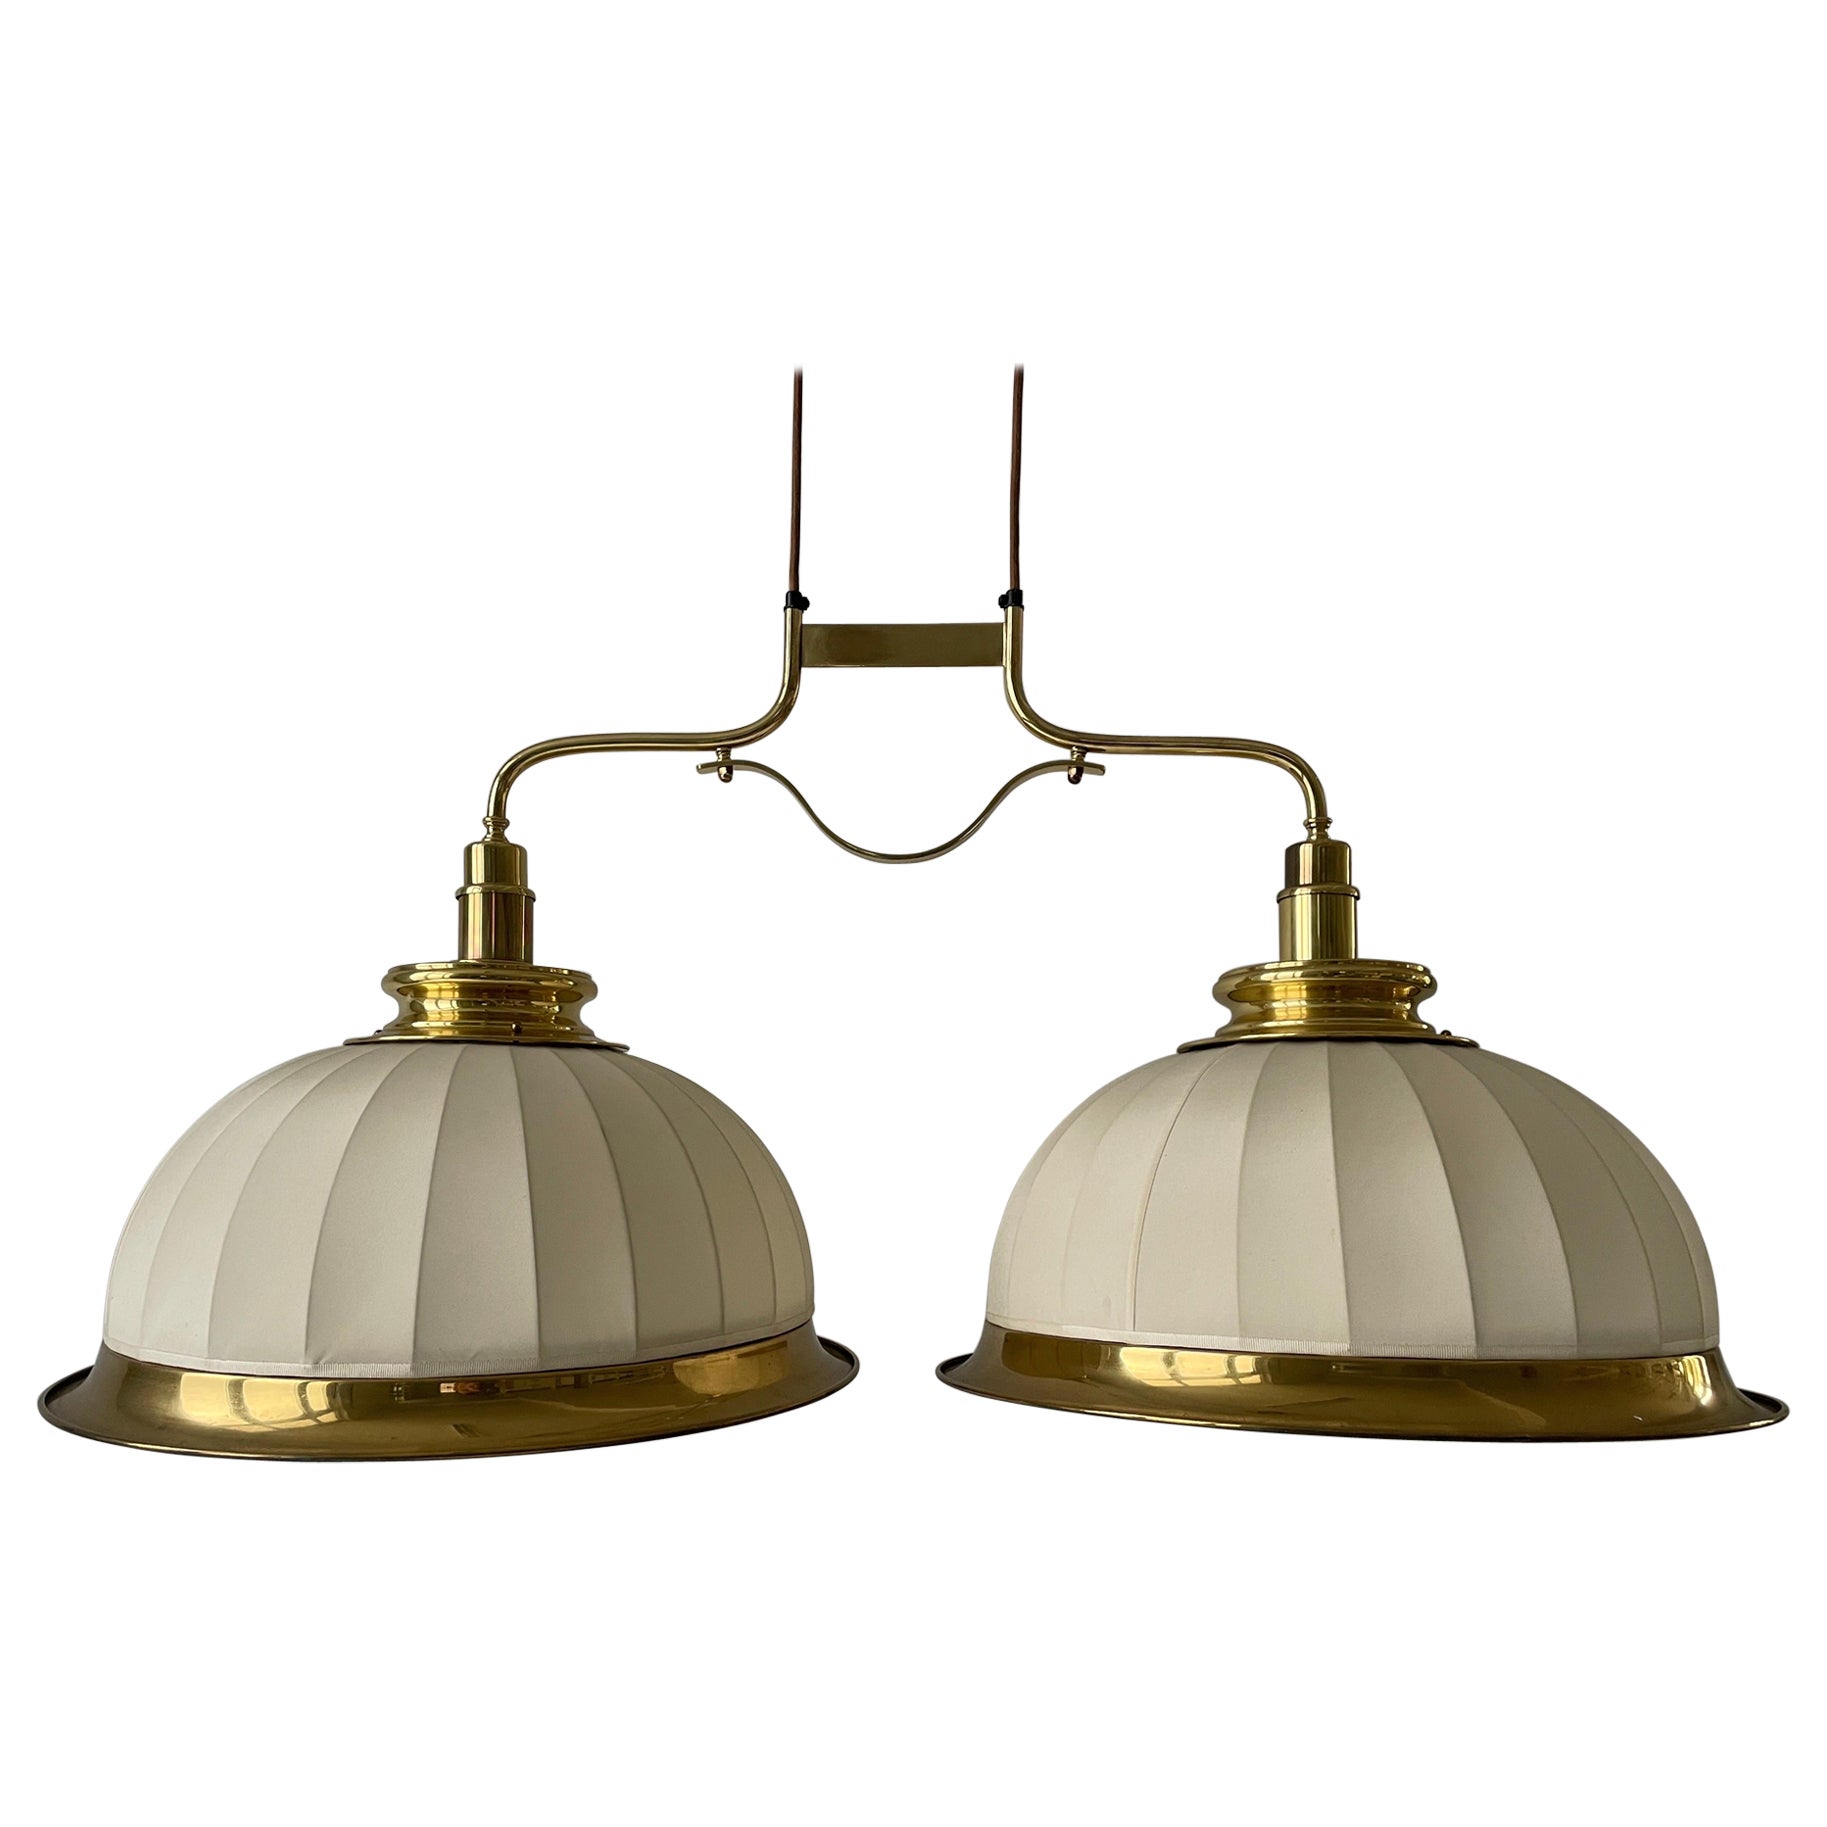 Mid-century Brass and Fabric Twin-shade Ceiling Lamp by WKR, 1960s, Germany For Sale